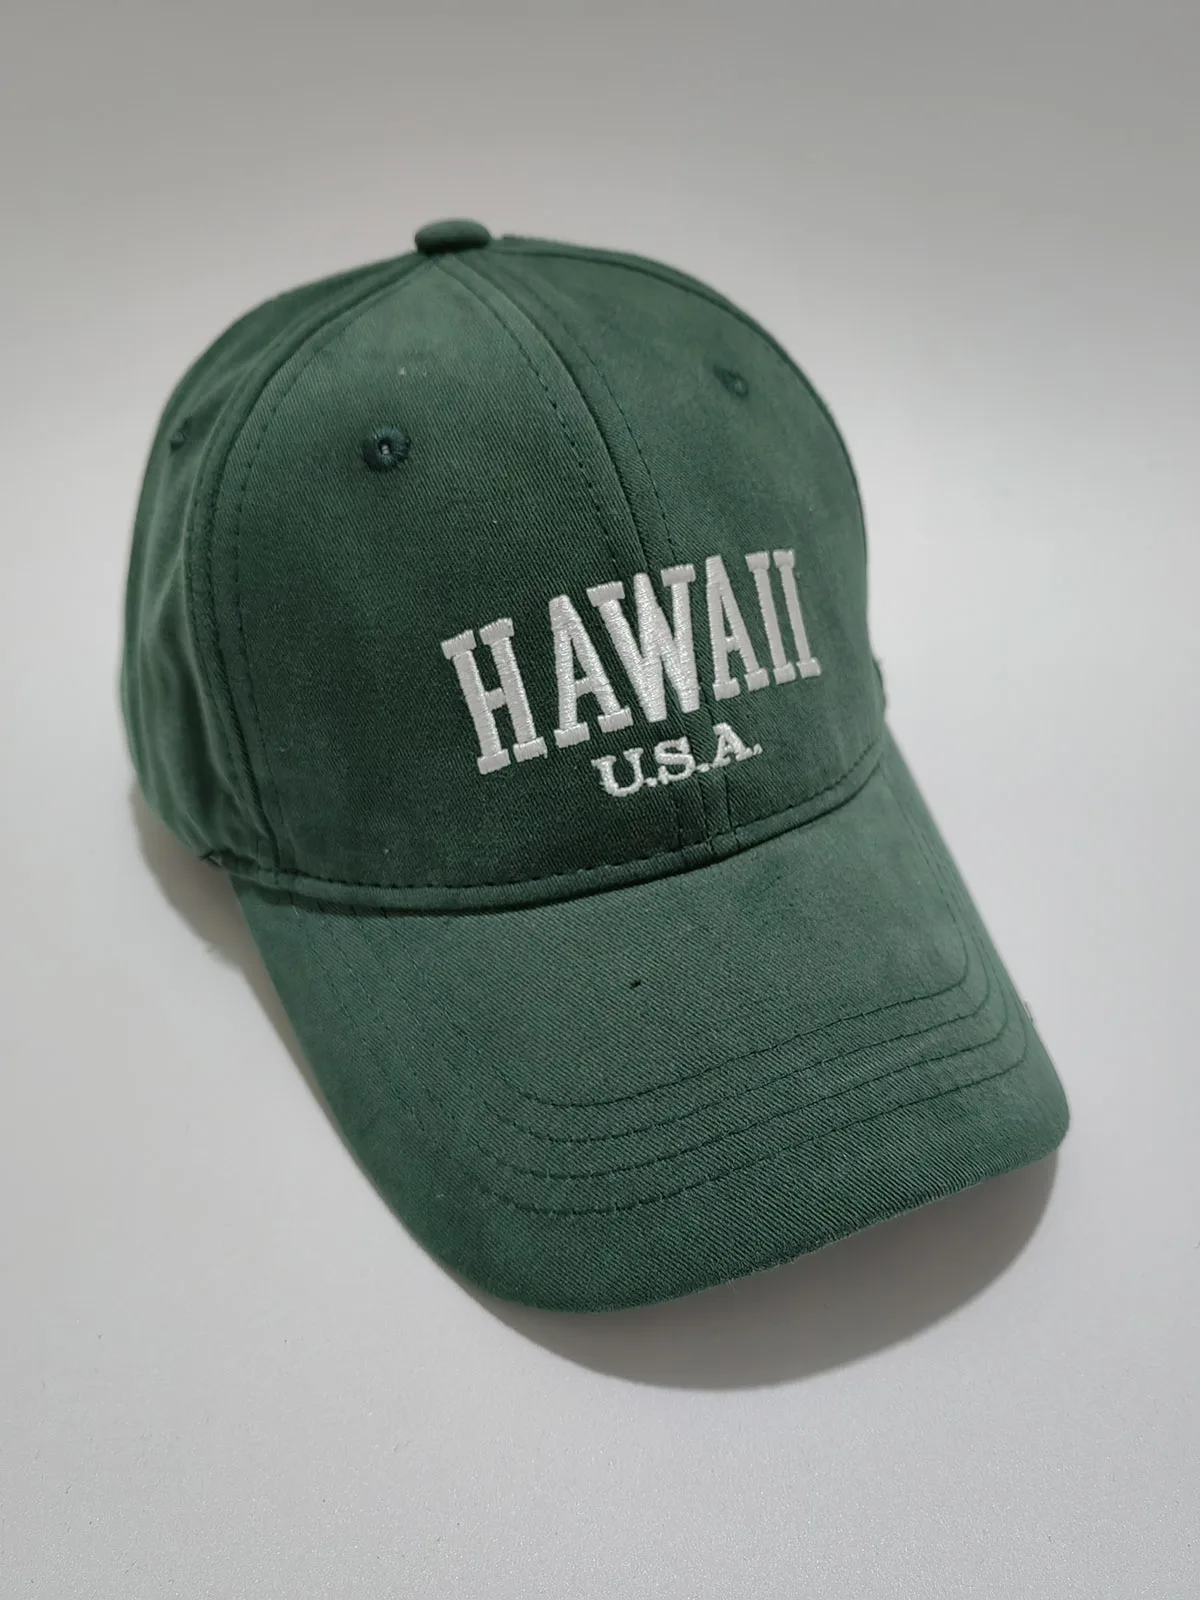 Fashion Baseball Cap For Men And Women Vintage Cotton Hawaii Embroidery Snapback Hat Spring Autumn Sun Visors Cap Lover Unisex